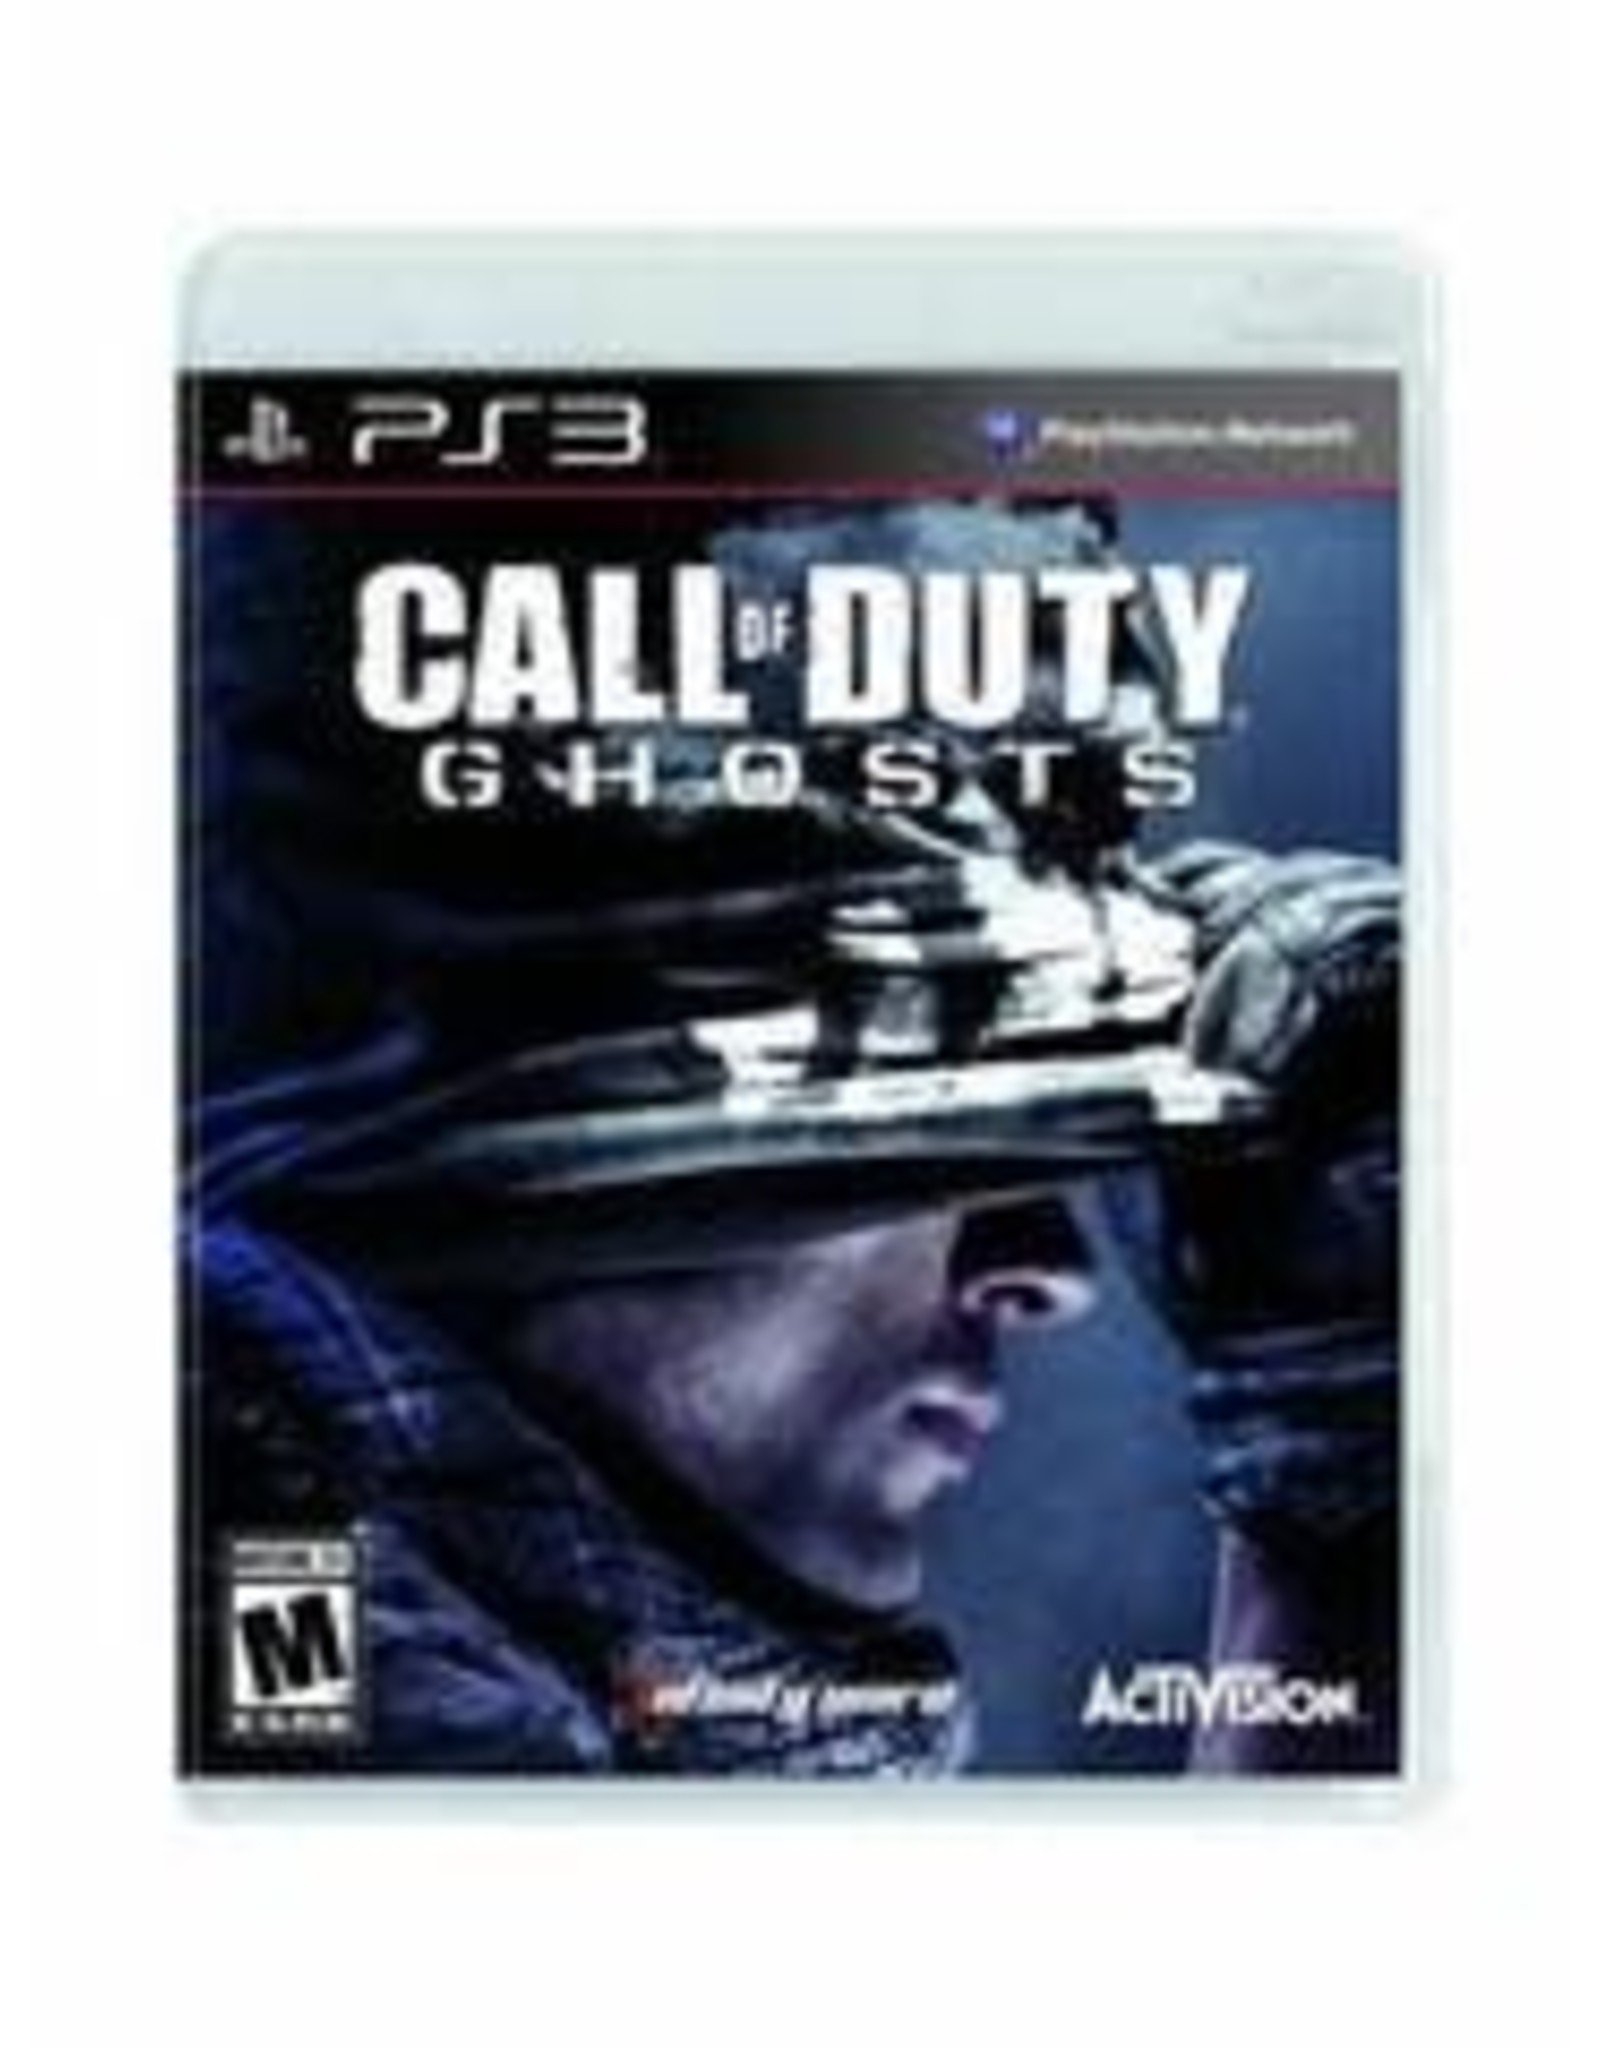 Playstation 3 Call of Duty Ghosts (Used)